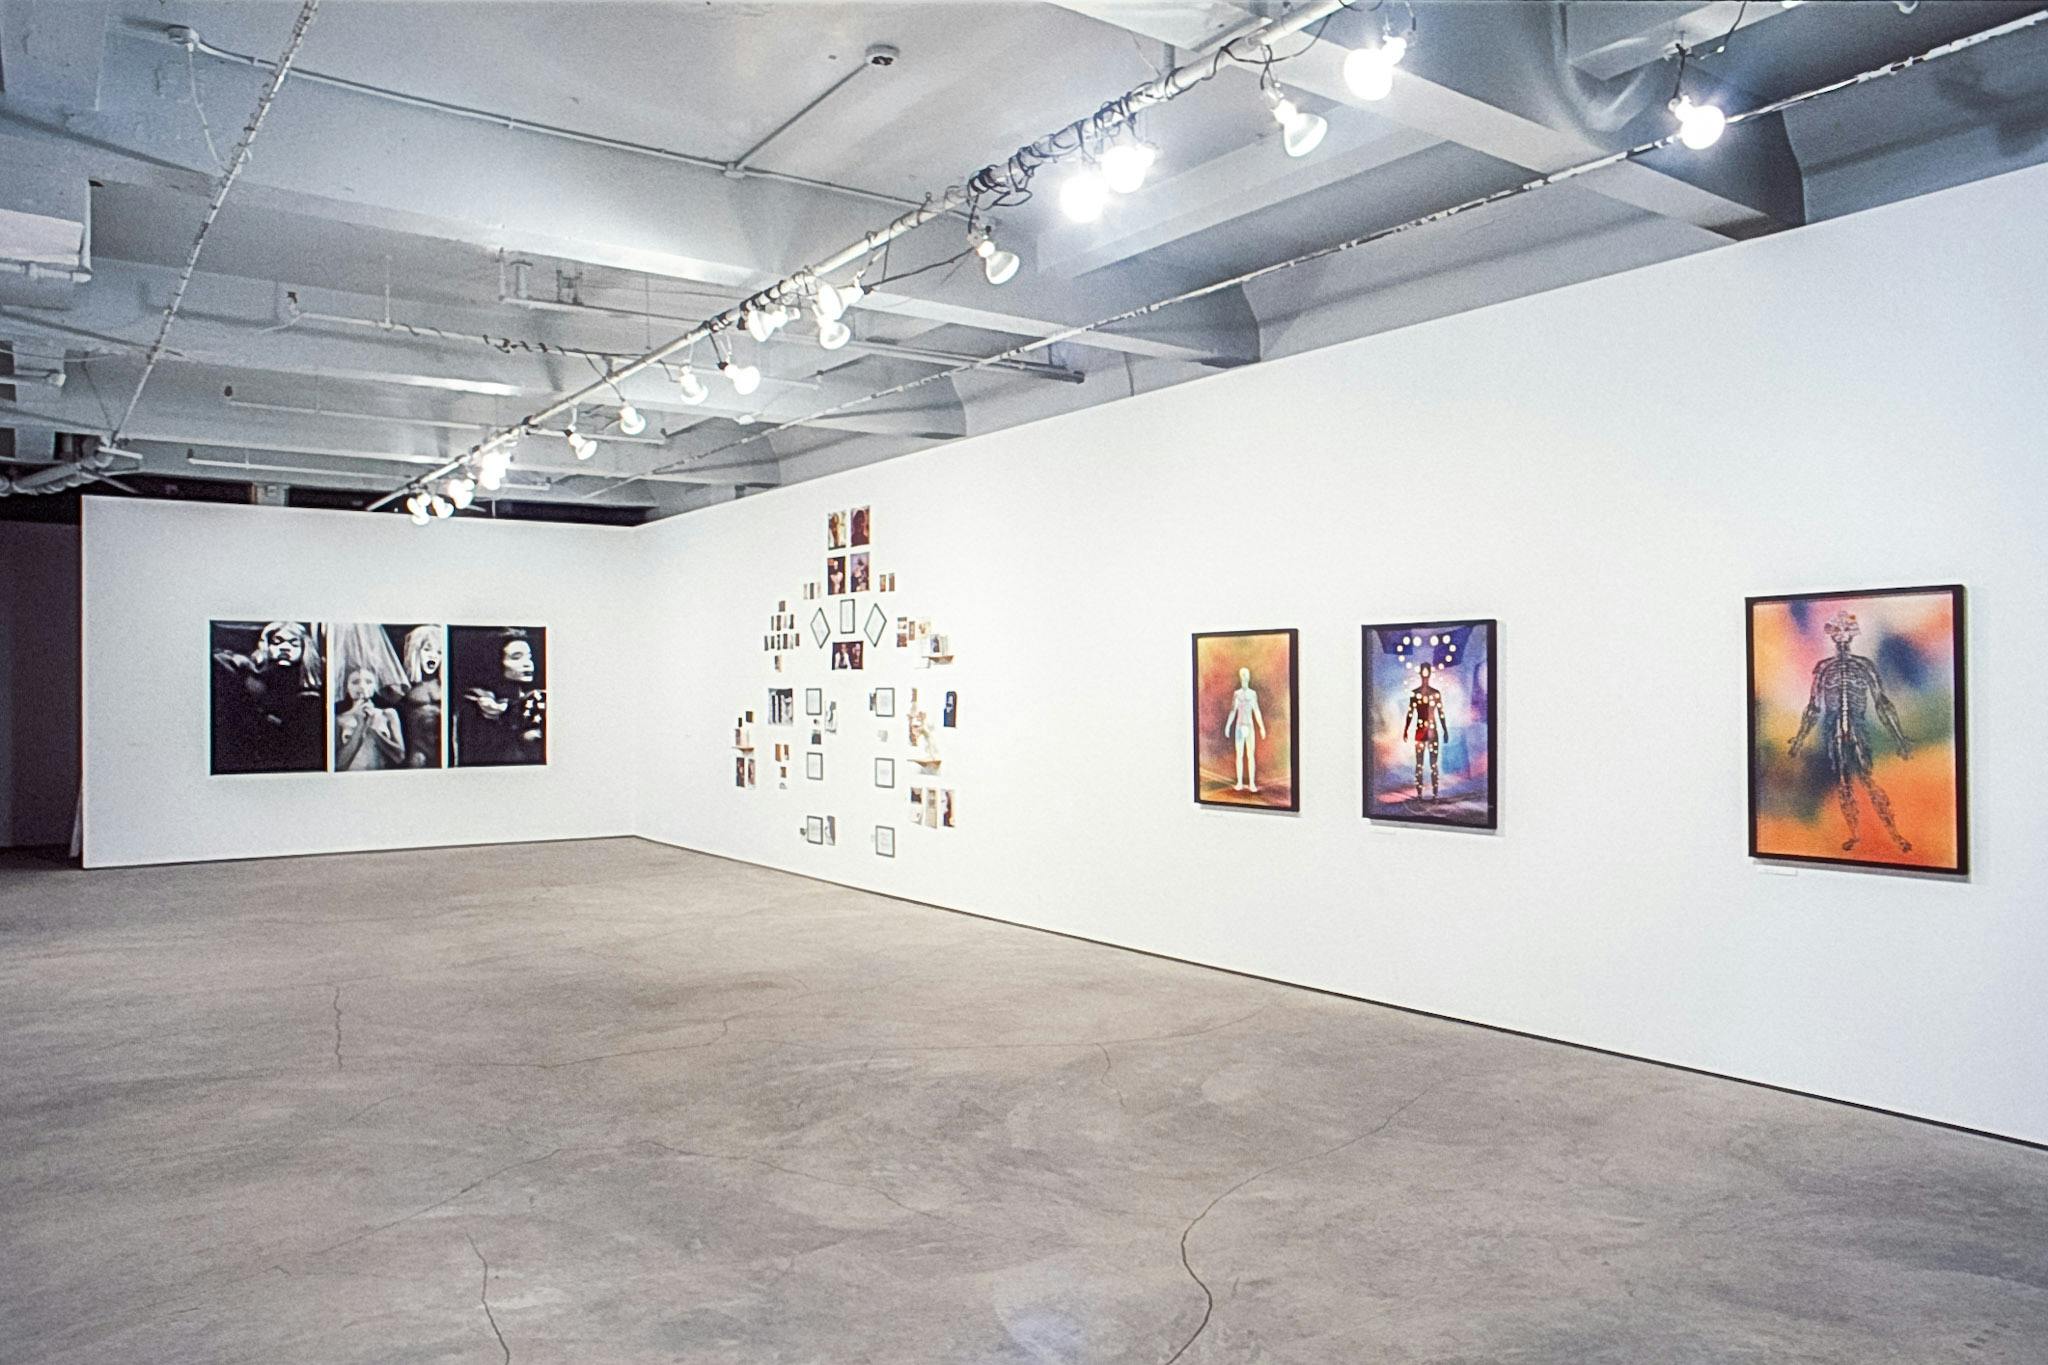 The corner of a gallery. One wall has 3 large black and white photos of people in drag, the other has a large composition of many small images, and 3 colourful framed images of nude, muscular people.